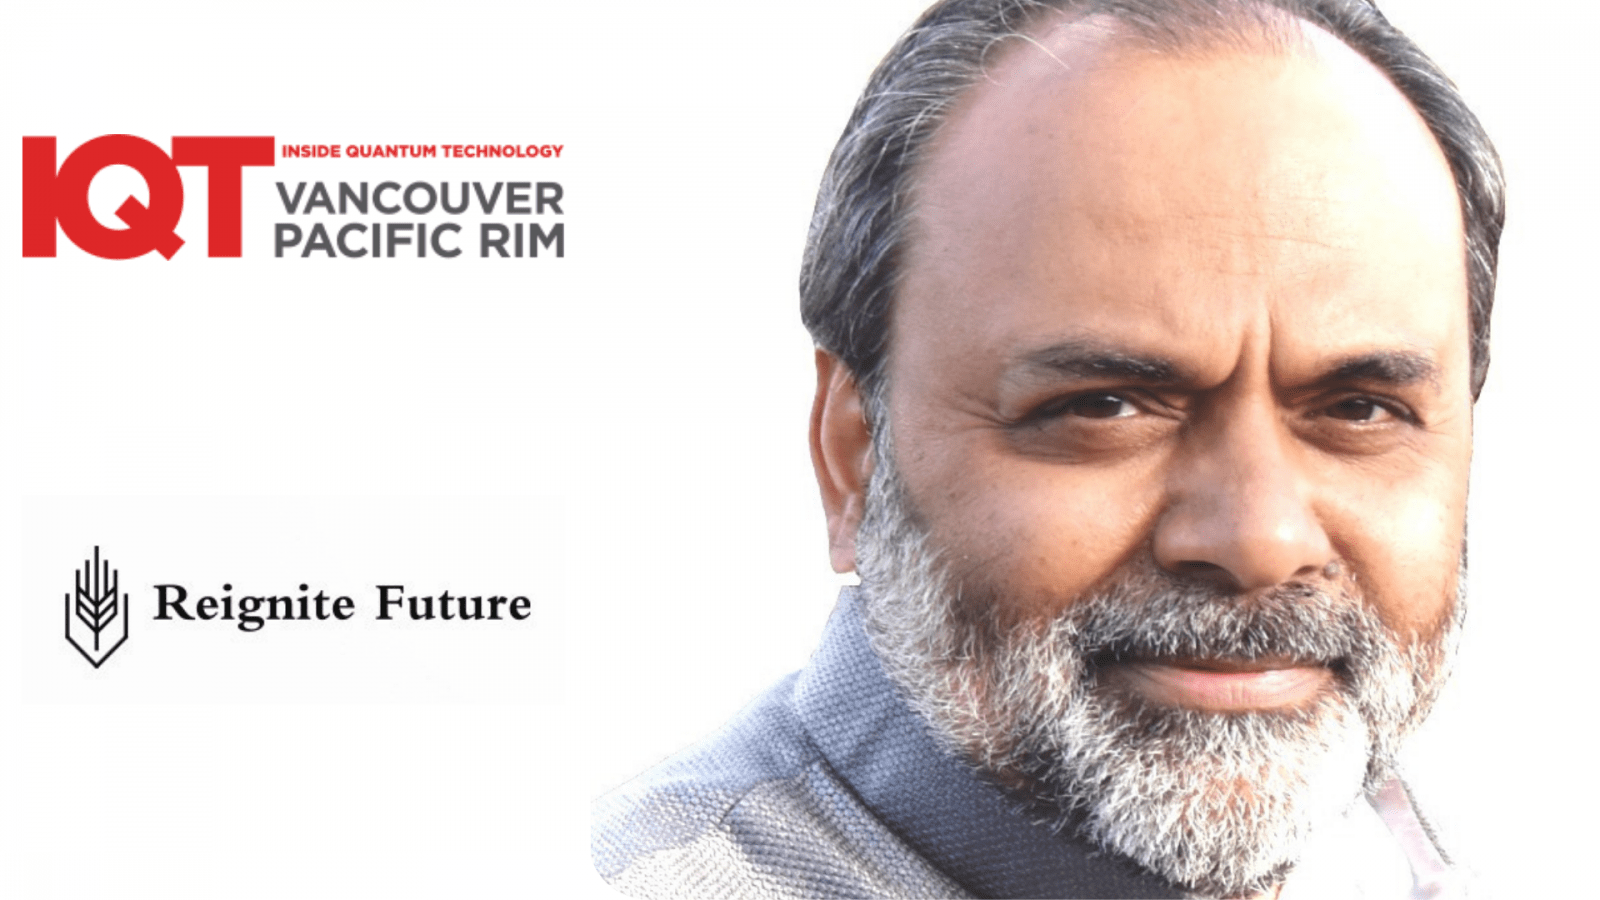 Former Halliburton Technology Fellow and Managing Director of Reignite Future, Satyam Priyadarshy, is an IQT 2024 Vancouver/Pacific Rim speaker